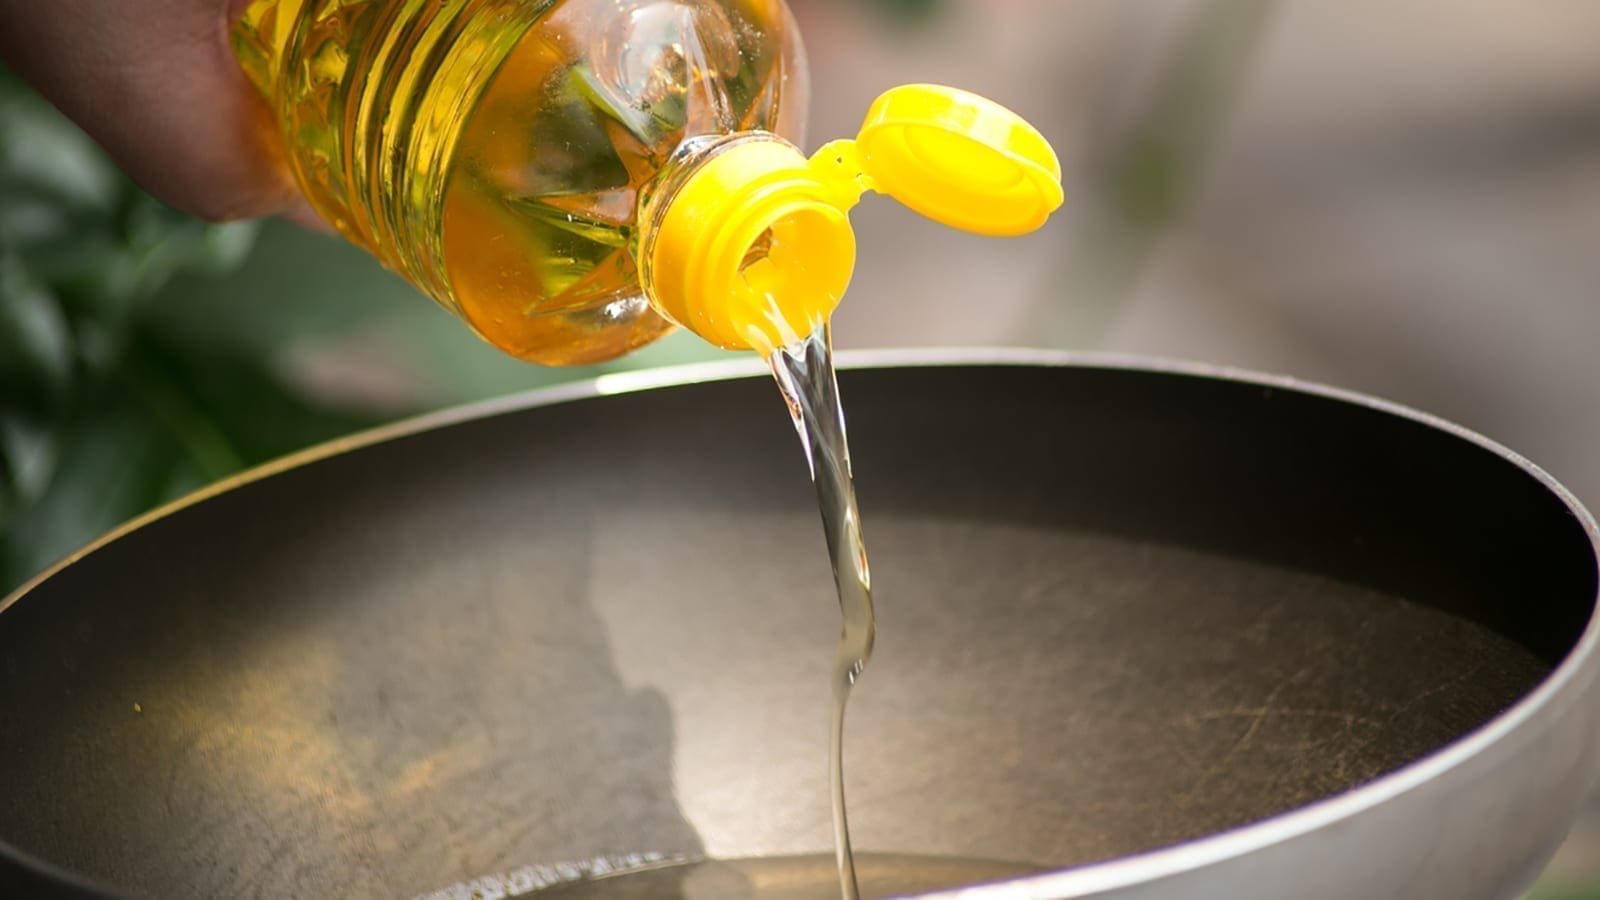 Rwanda to boost local production of edible oil with US$10m investment in new processing plant